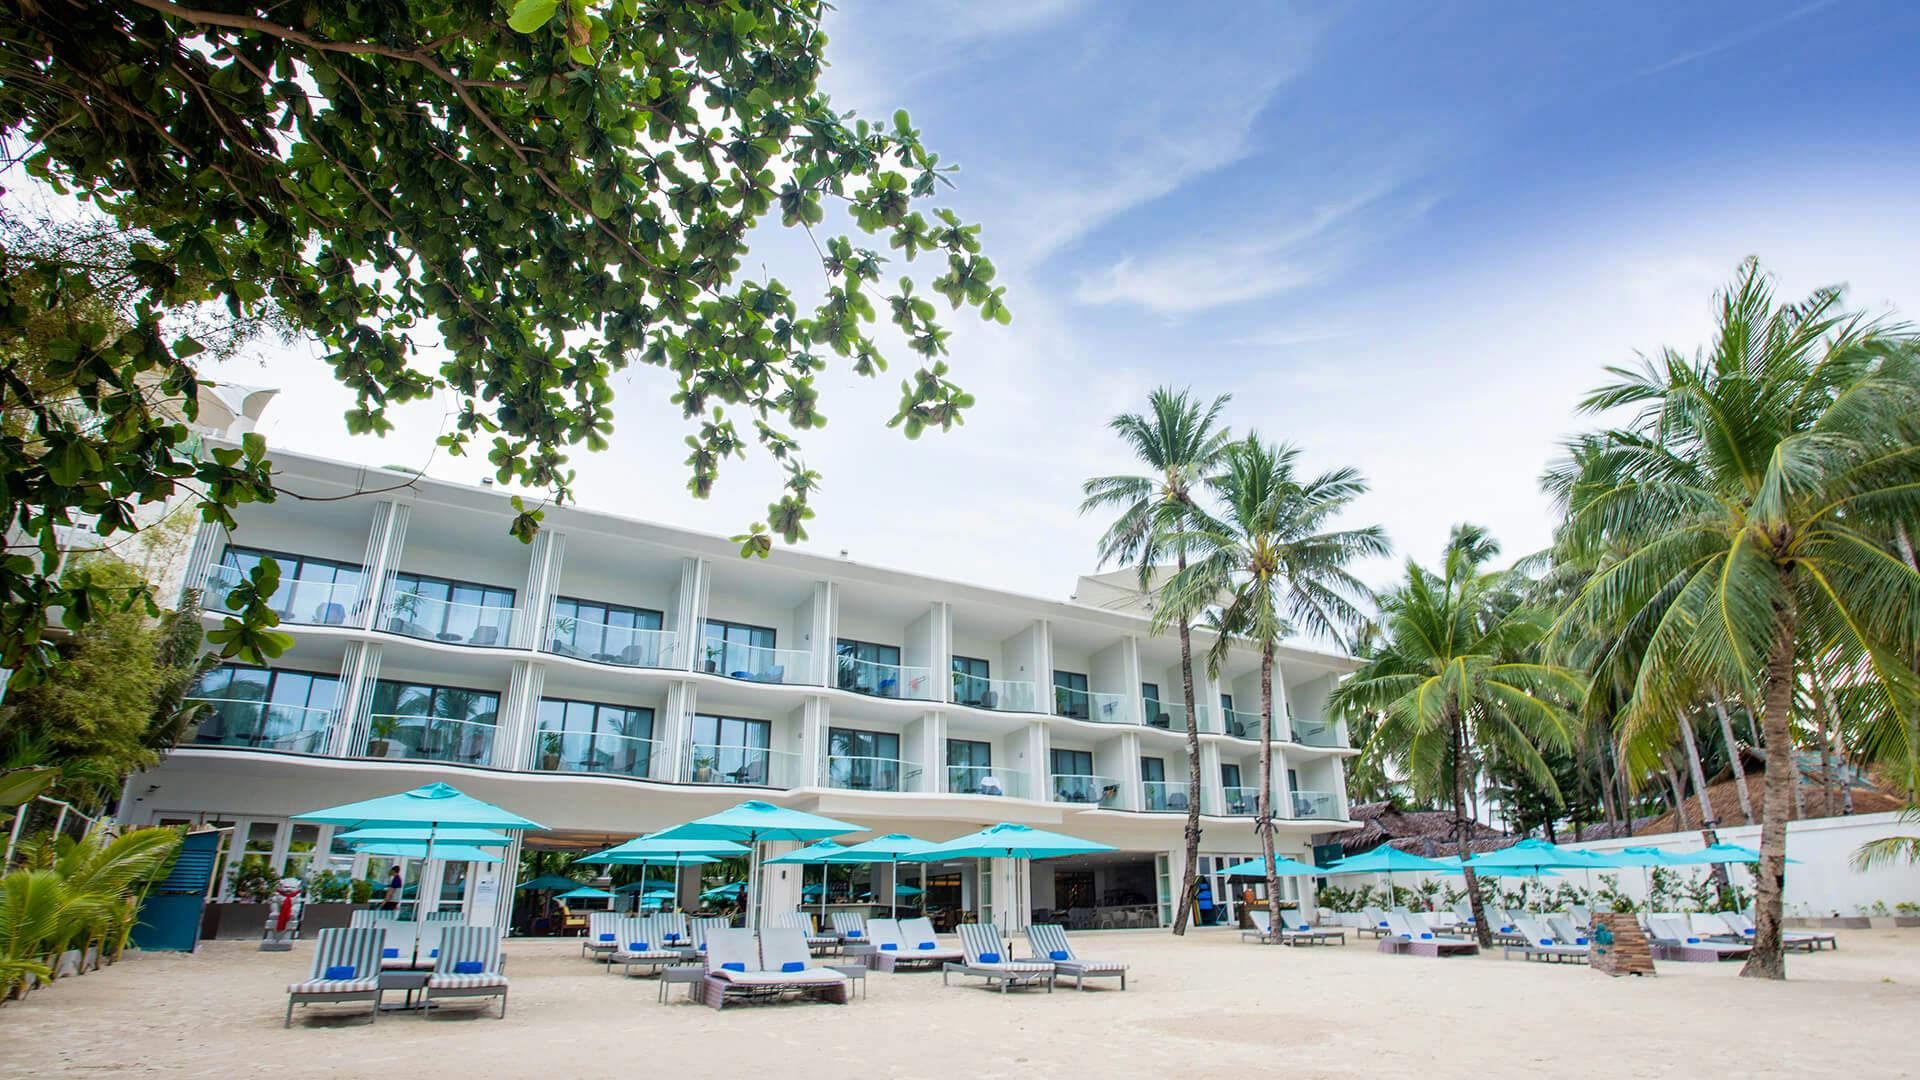 4D3N Boracay Package with Airfare | The Lind Hotel from Manila - day 4